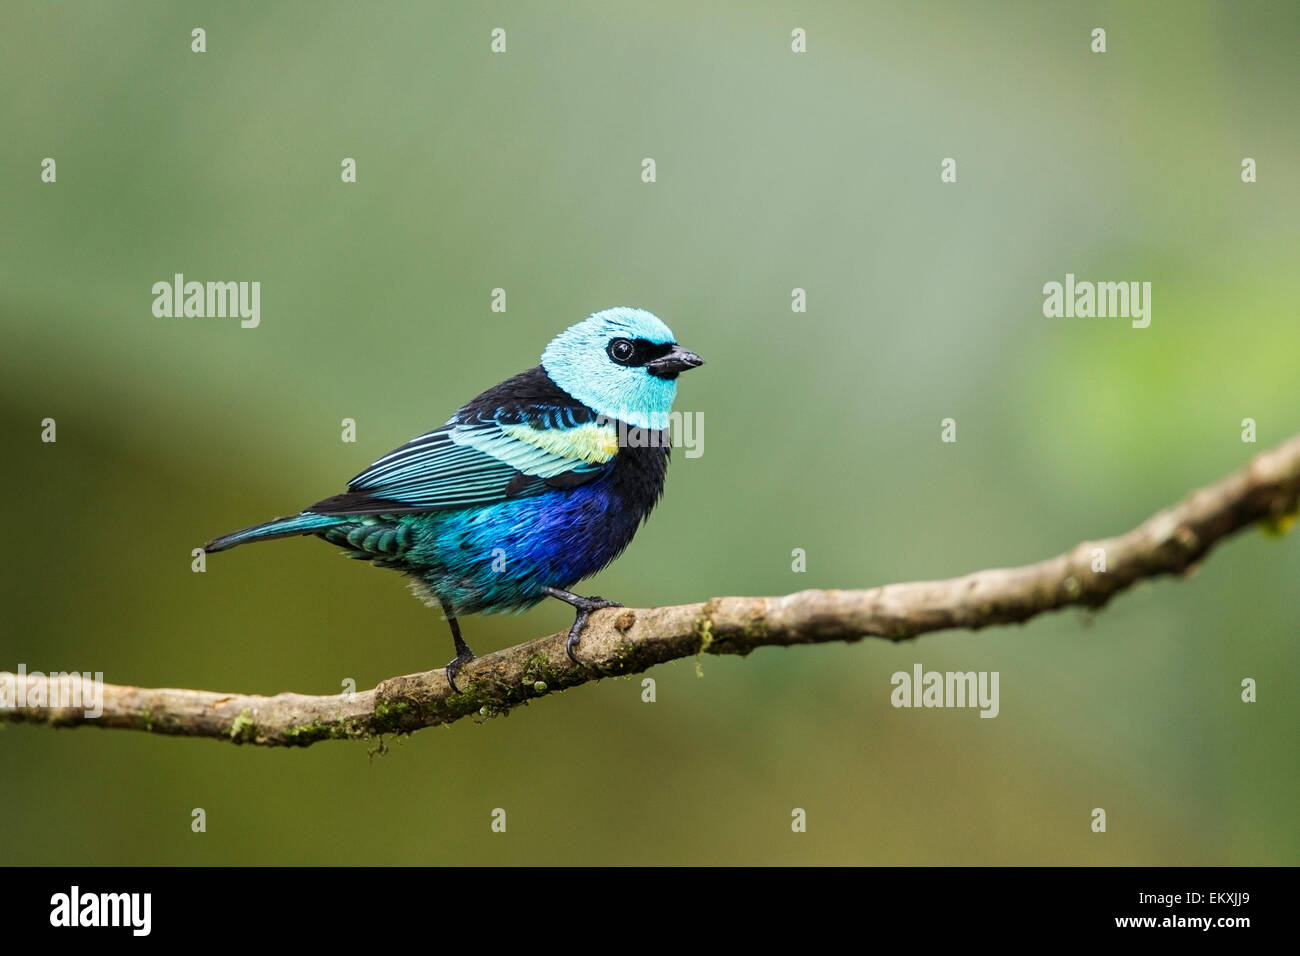 blue-necked tanager (Tangara cyanicollis) adult male perched on branch in rain forest, Ecuador, central America Stock Photo